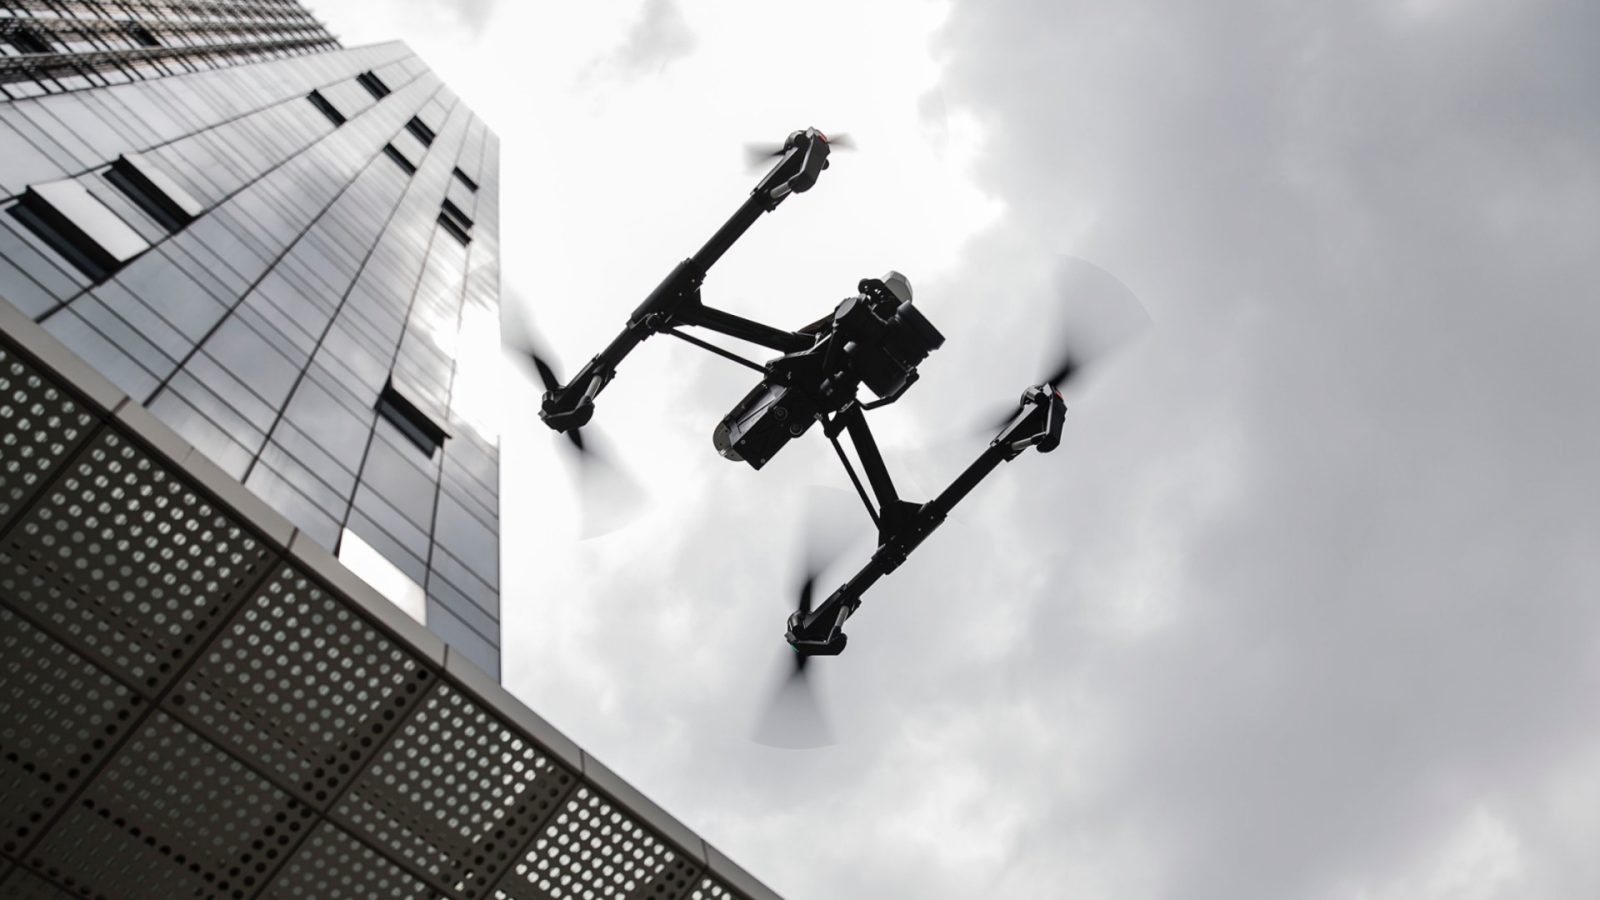 DJI drones banned by tech supplier to U.S. law enforcement agencies in favor of Skydio